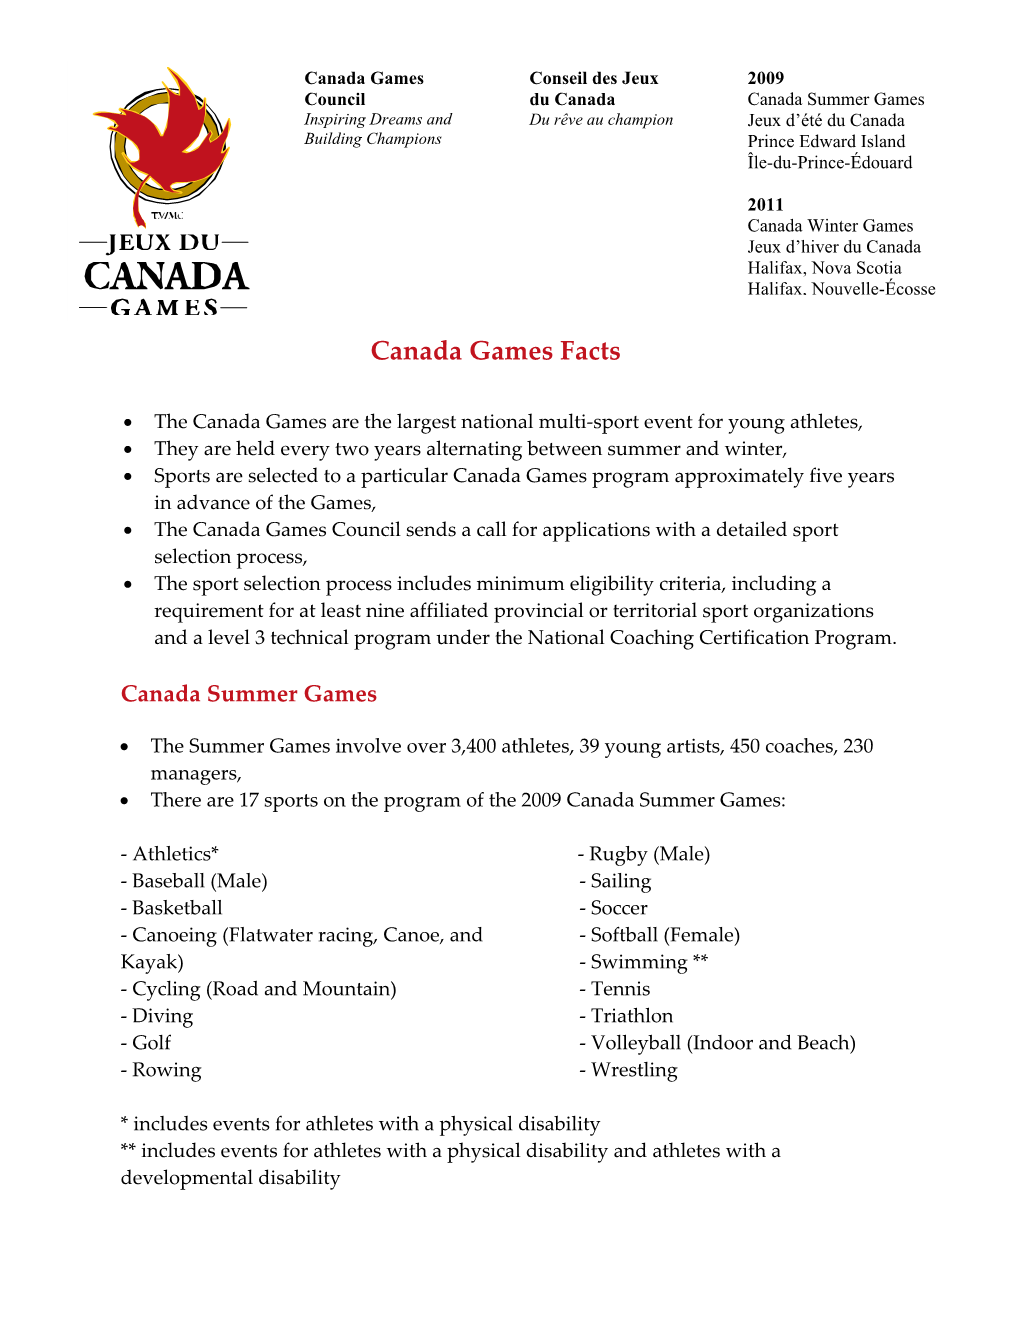 Canada Games Facts